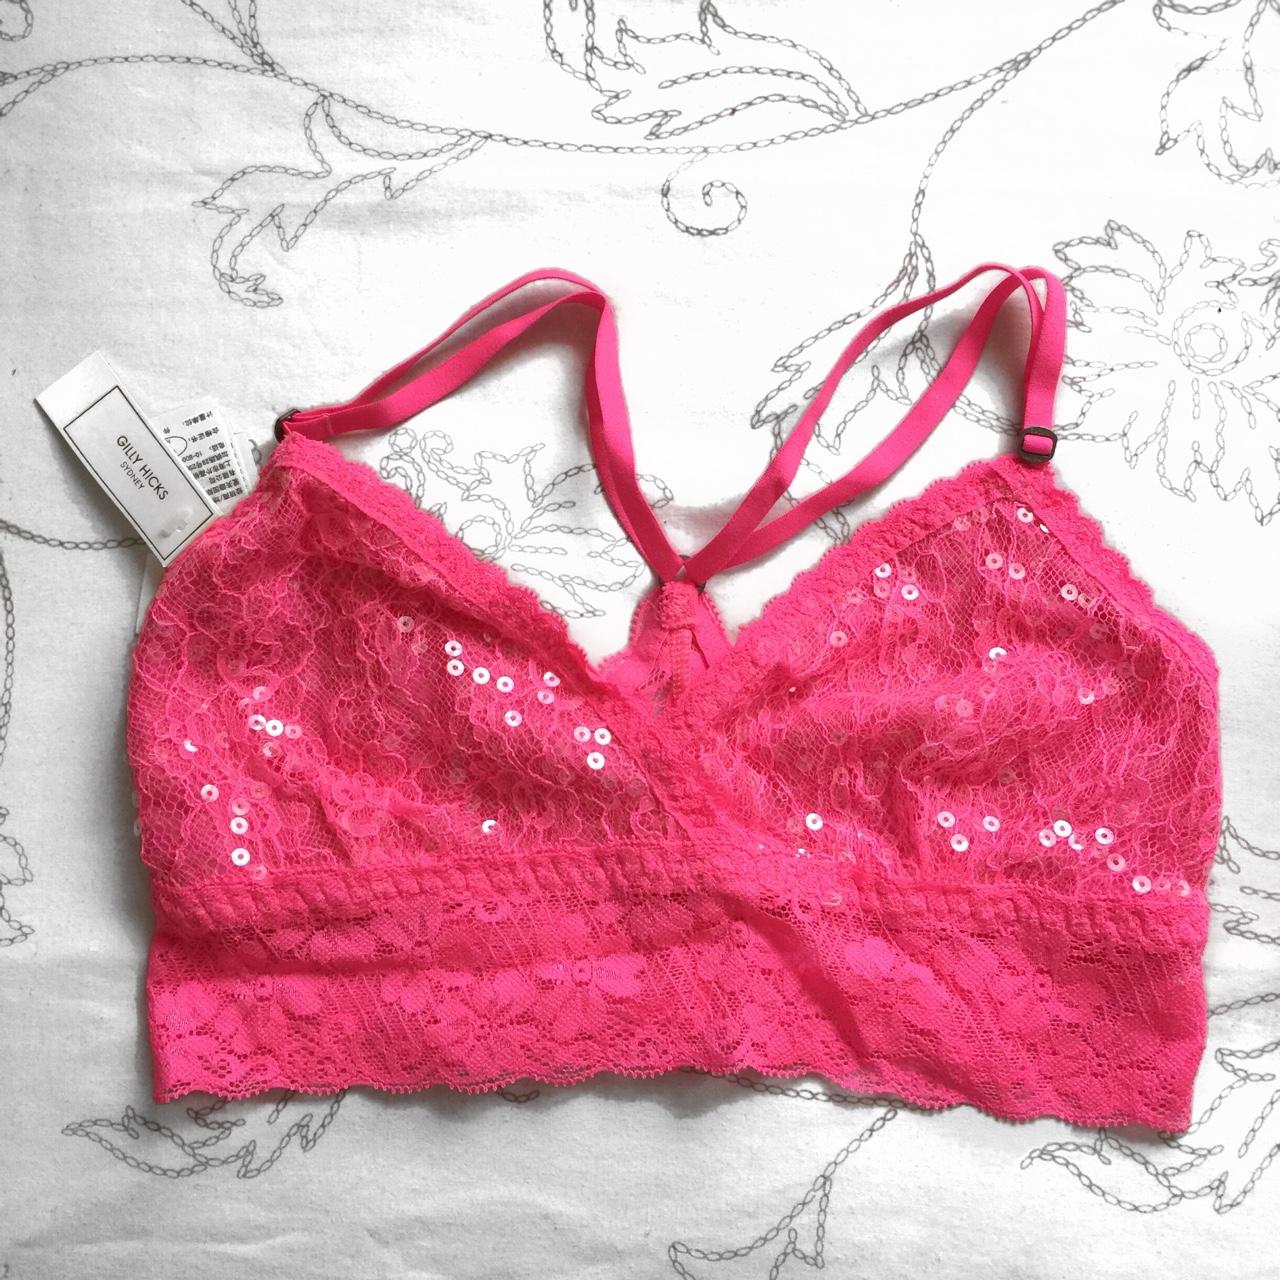 NEW W/ TAGS Gilly hicks pink sparkly bralette sports